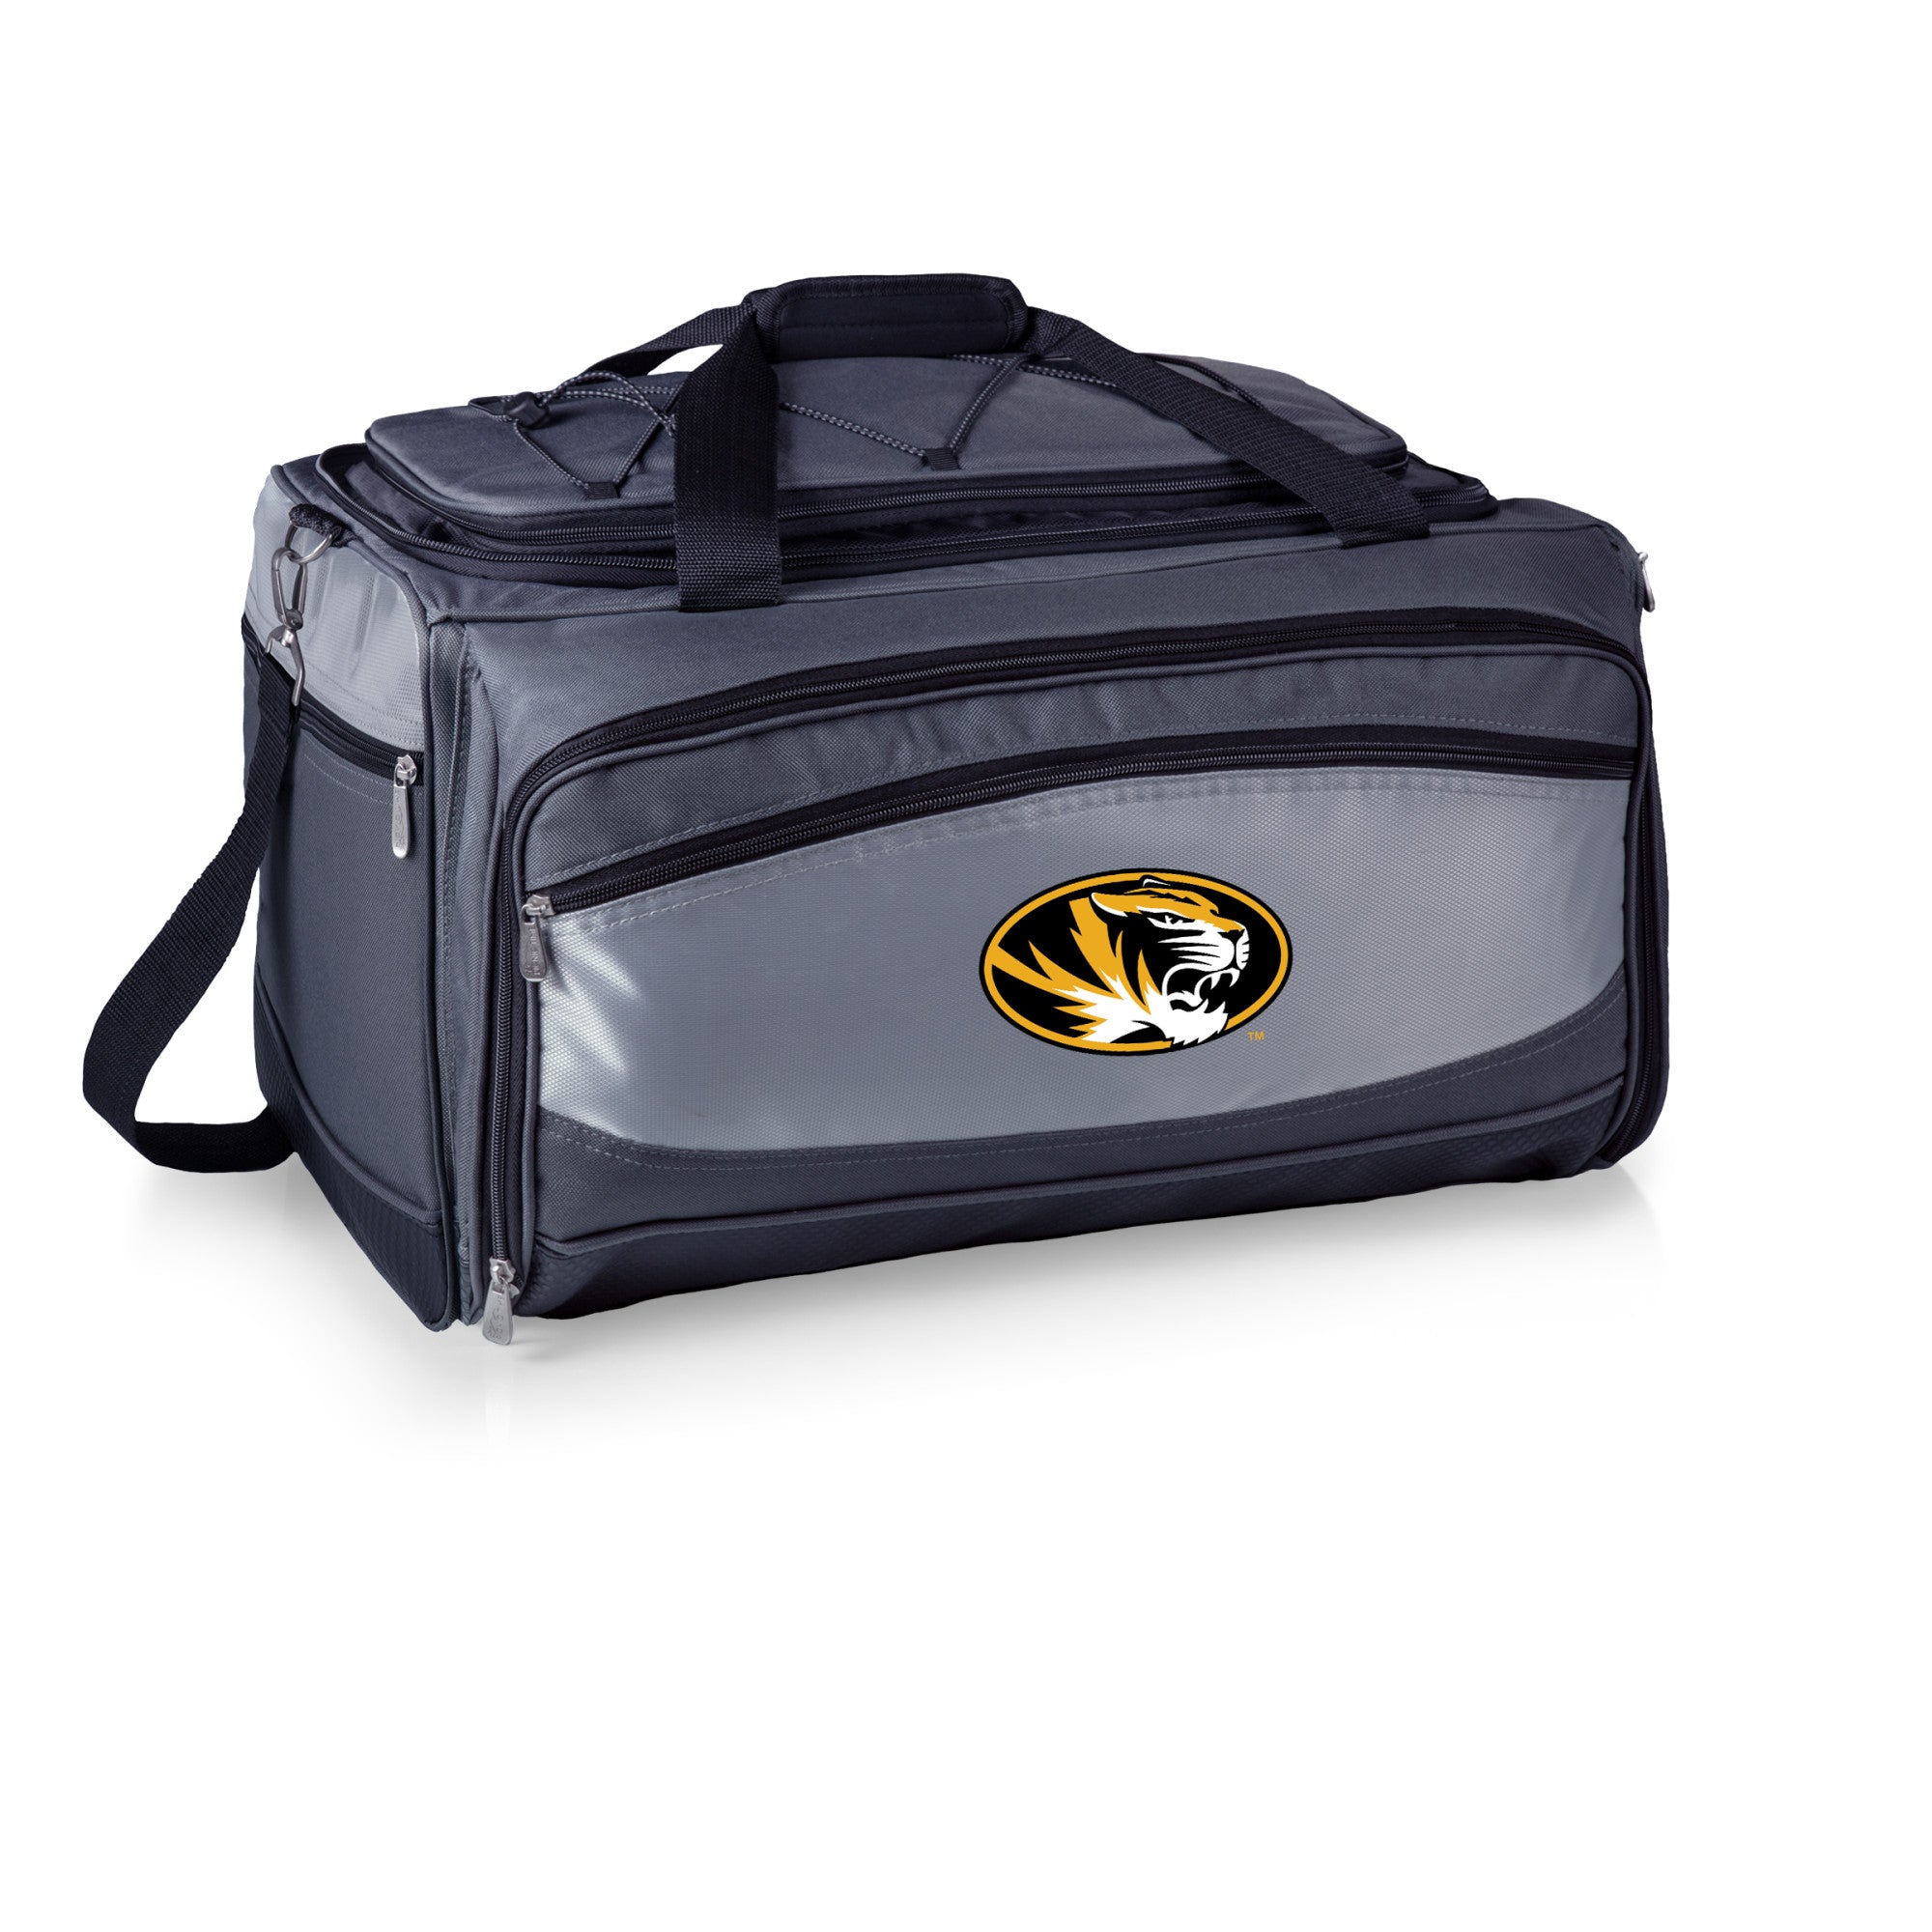 Mizzou Tigers - Buccaneer Portable Charcoal Grill & Cooler Tote